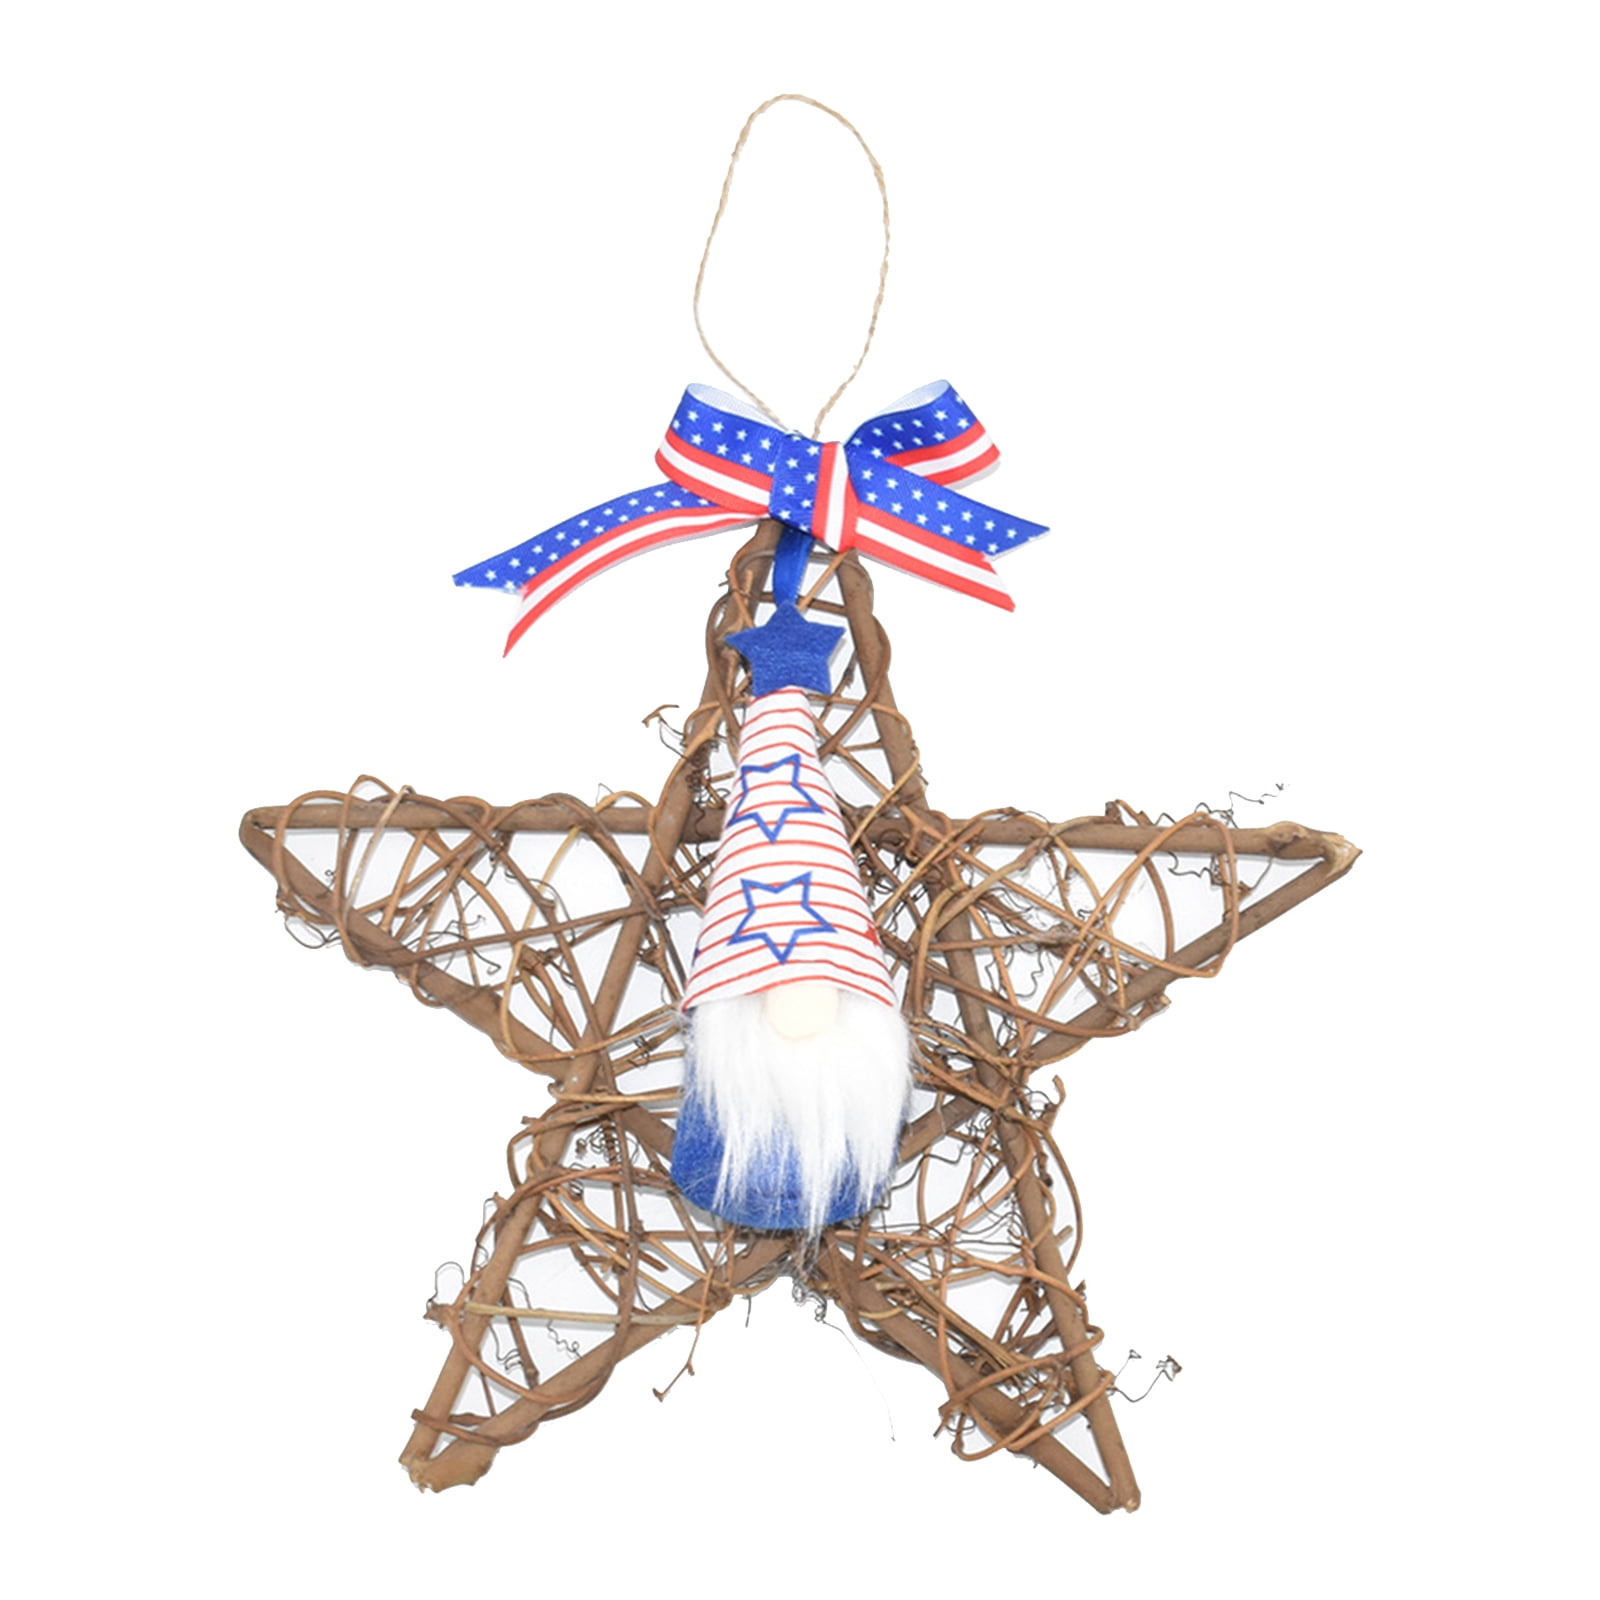 Details about   Rattan Star Patriotic Independence Day Vine Wreath Craft Hanging Ornament 